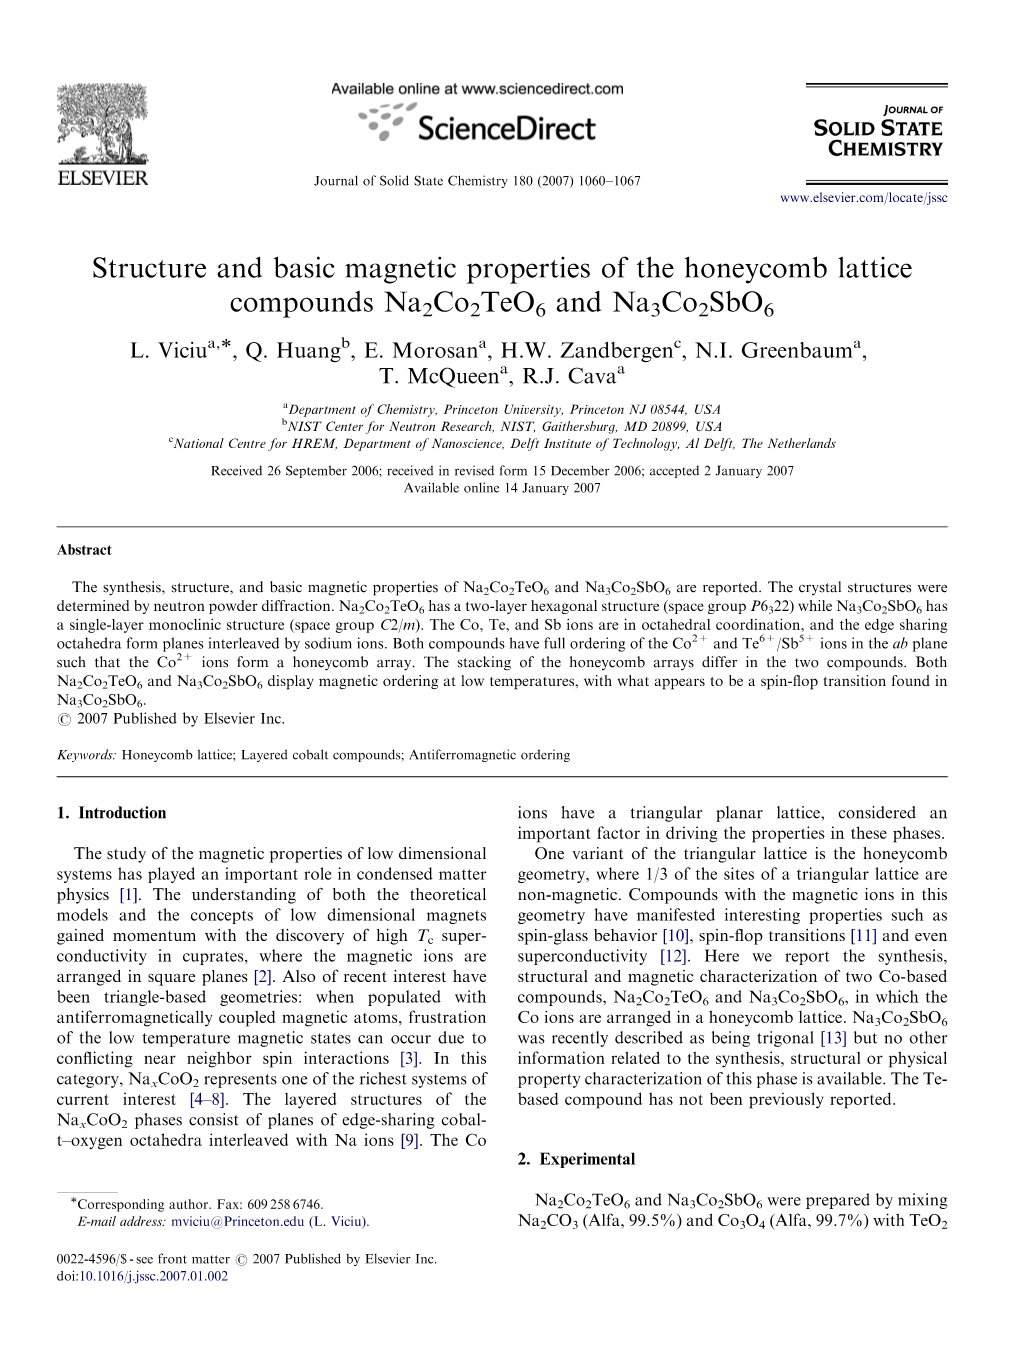 Structure and Basic Magnetic Properties of the Honeycomb Lattice Compounds Na2co2teo6 and Na3co2sbo6 L